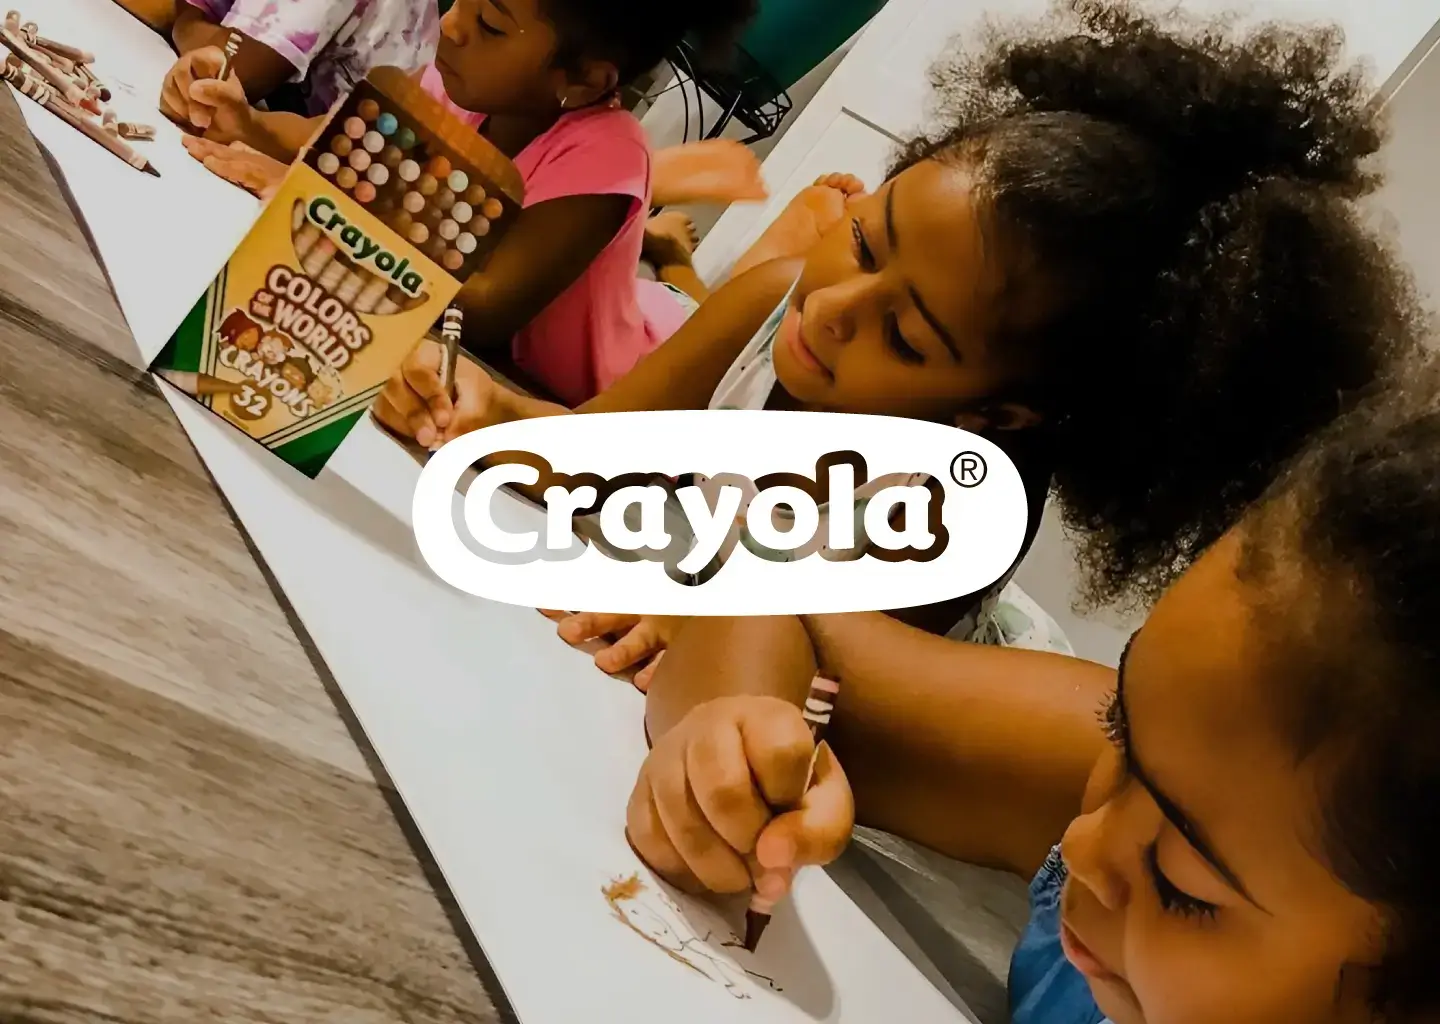 Crayola Launches Entire Line Of Multicultural Skin Tone Crayons To